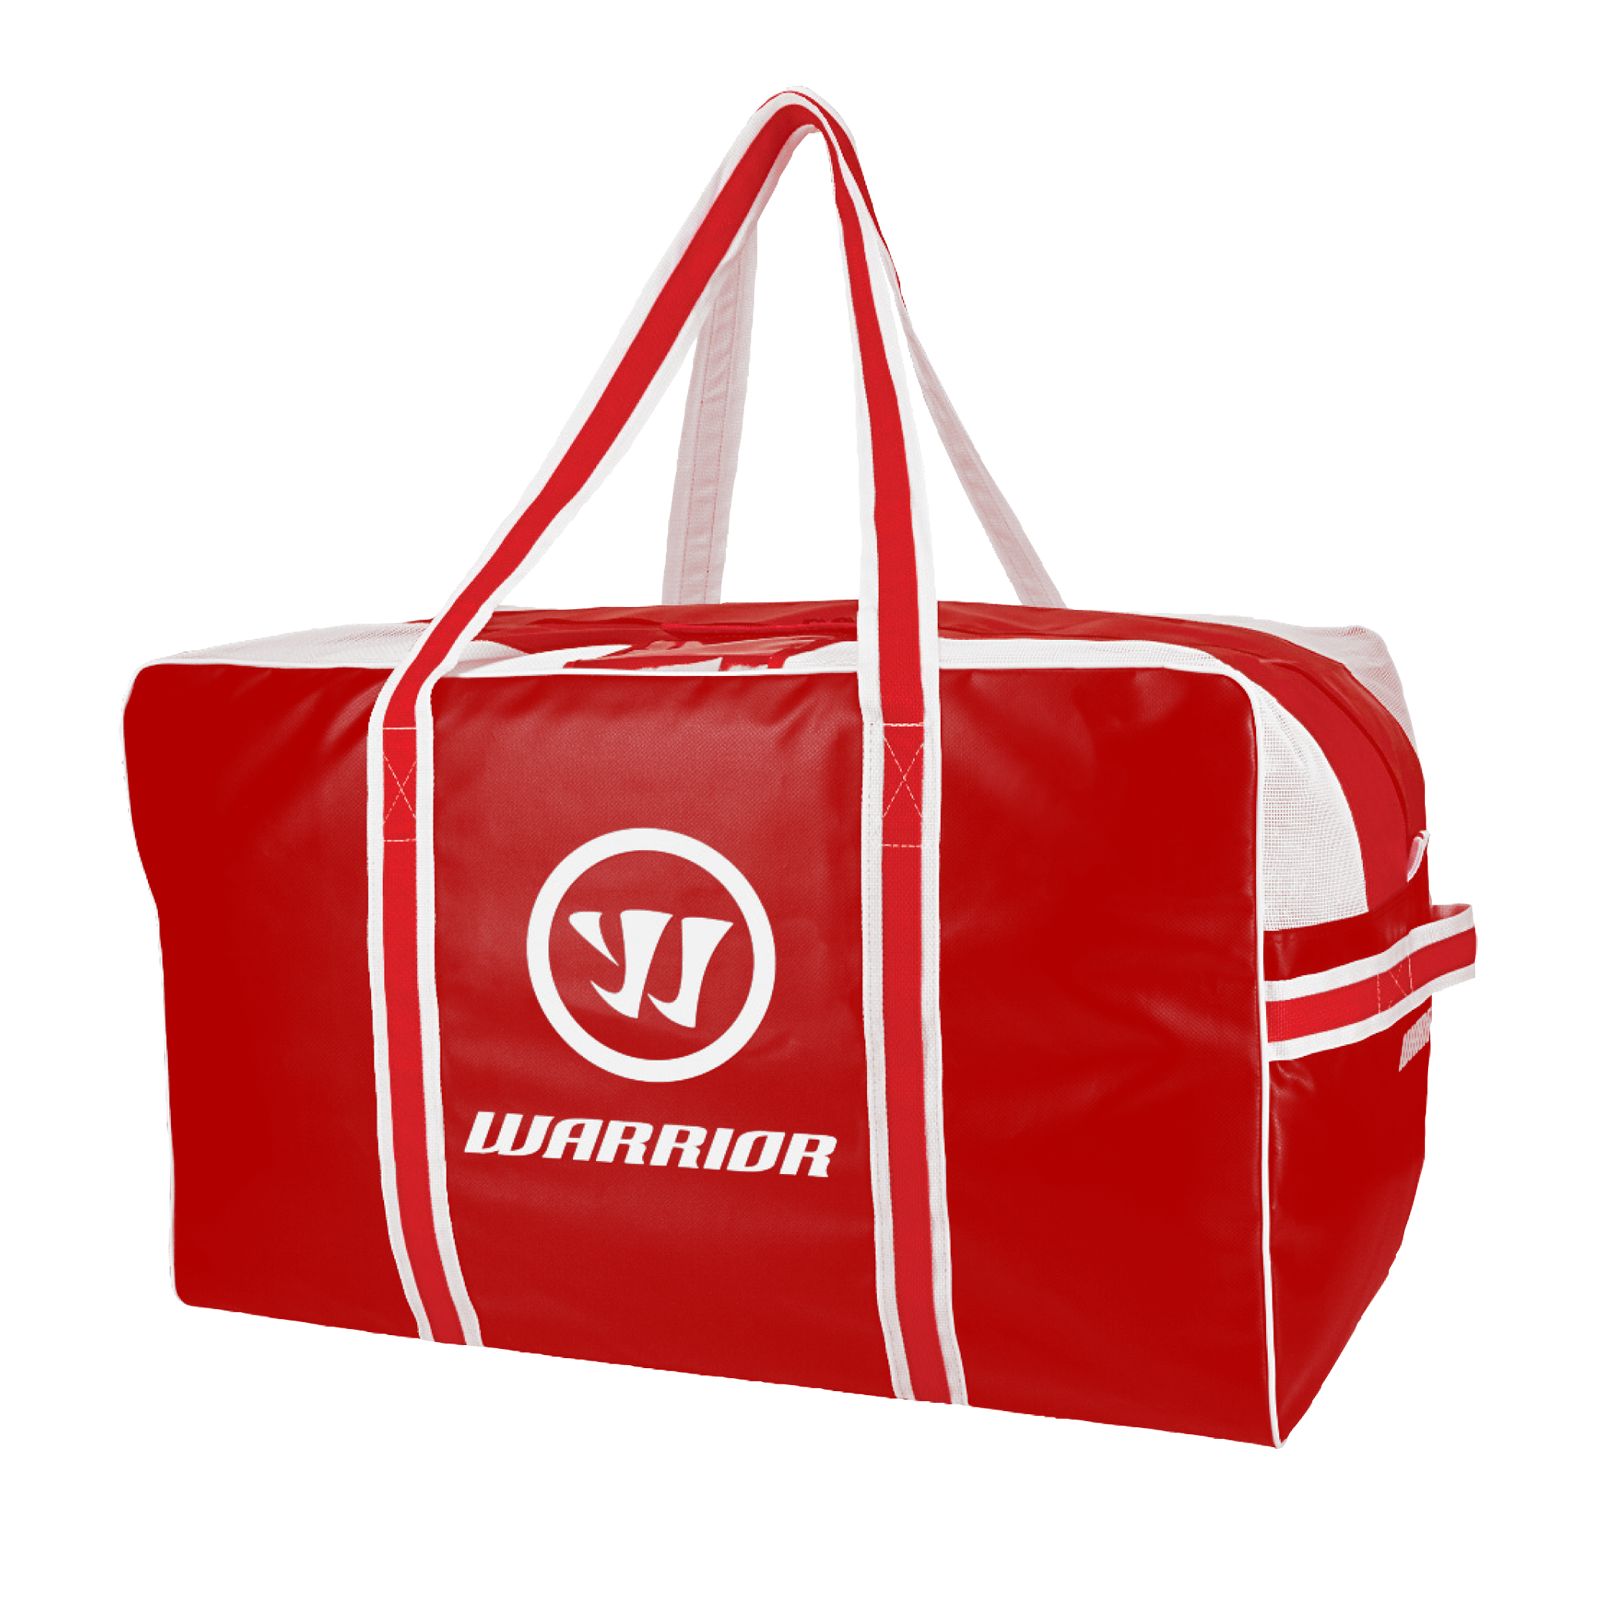 Warrior Pro Bag, Red with White image number 1